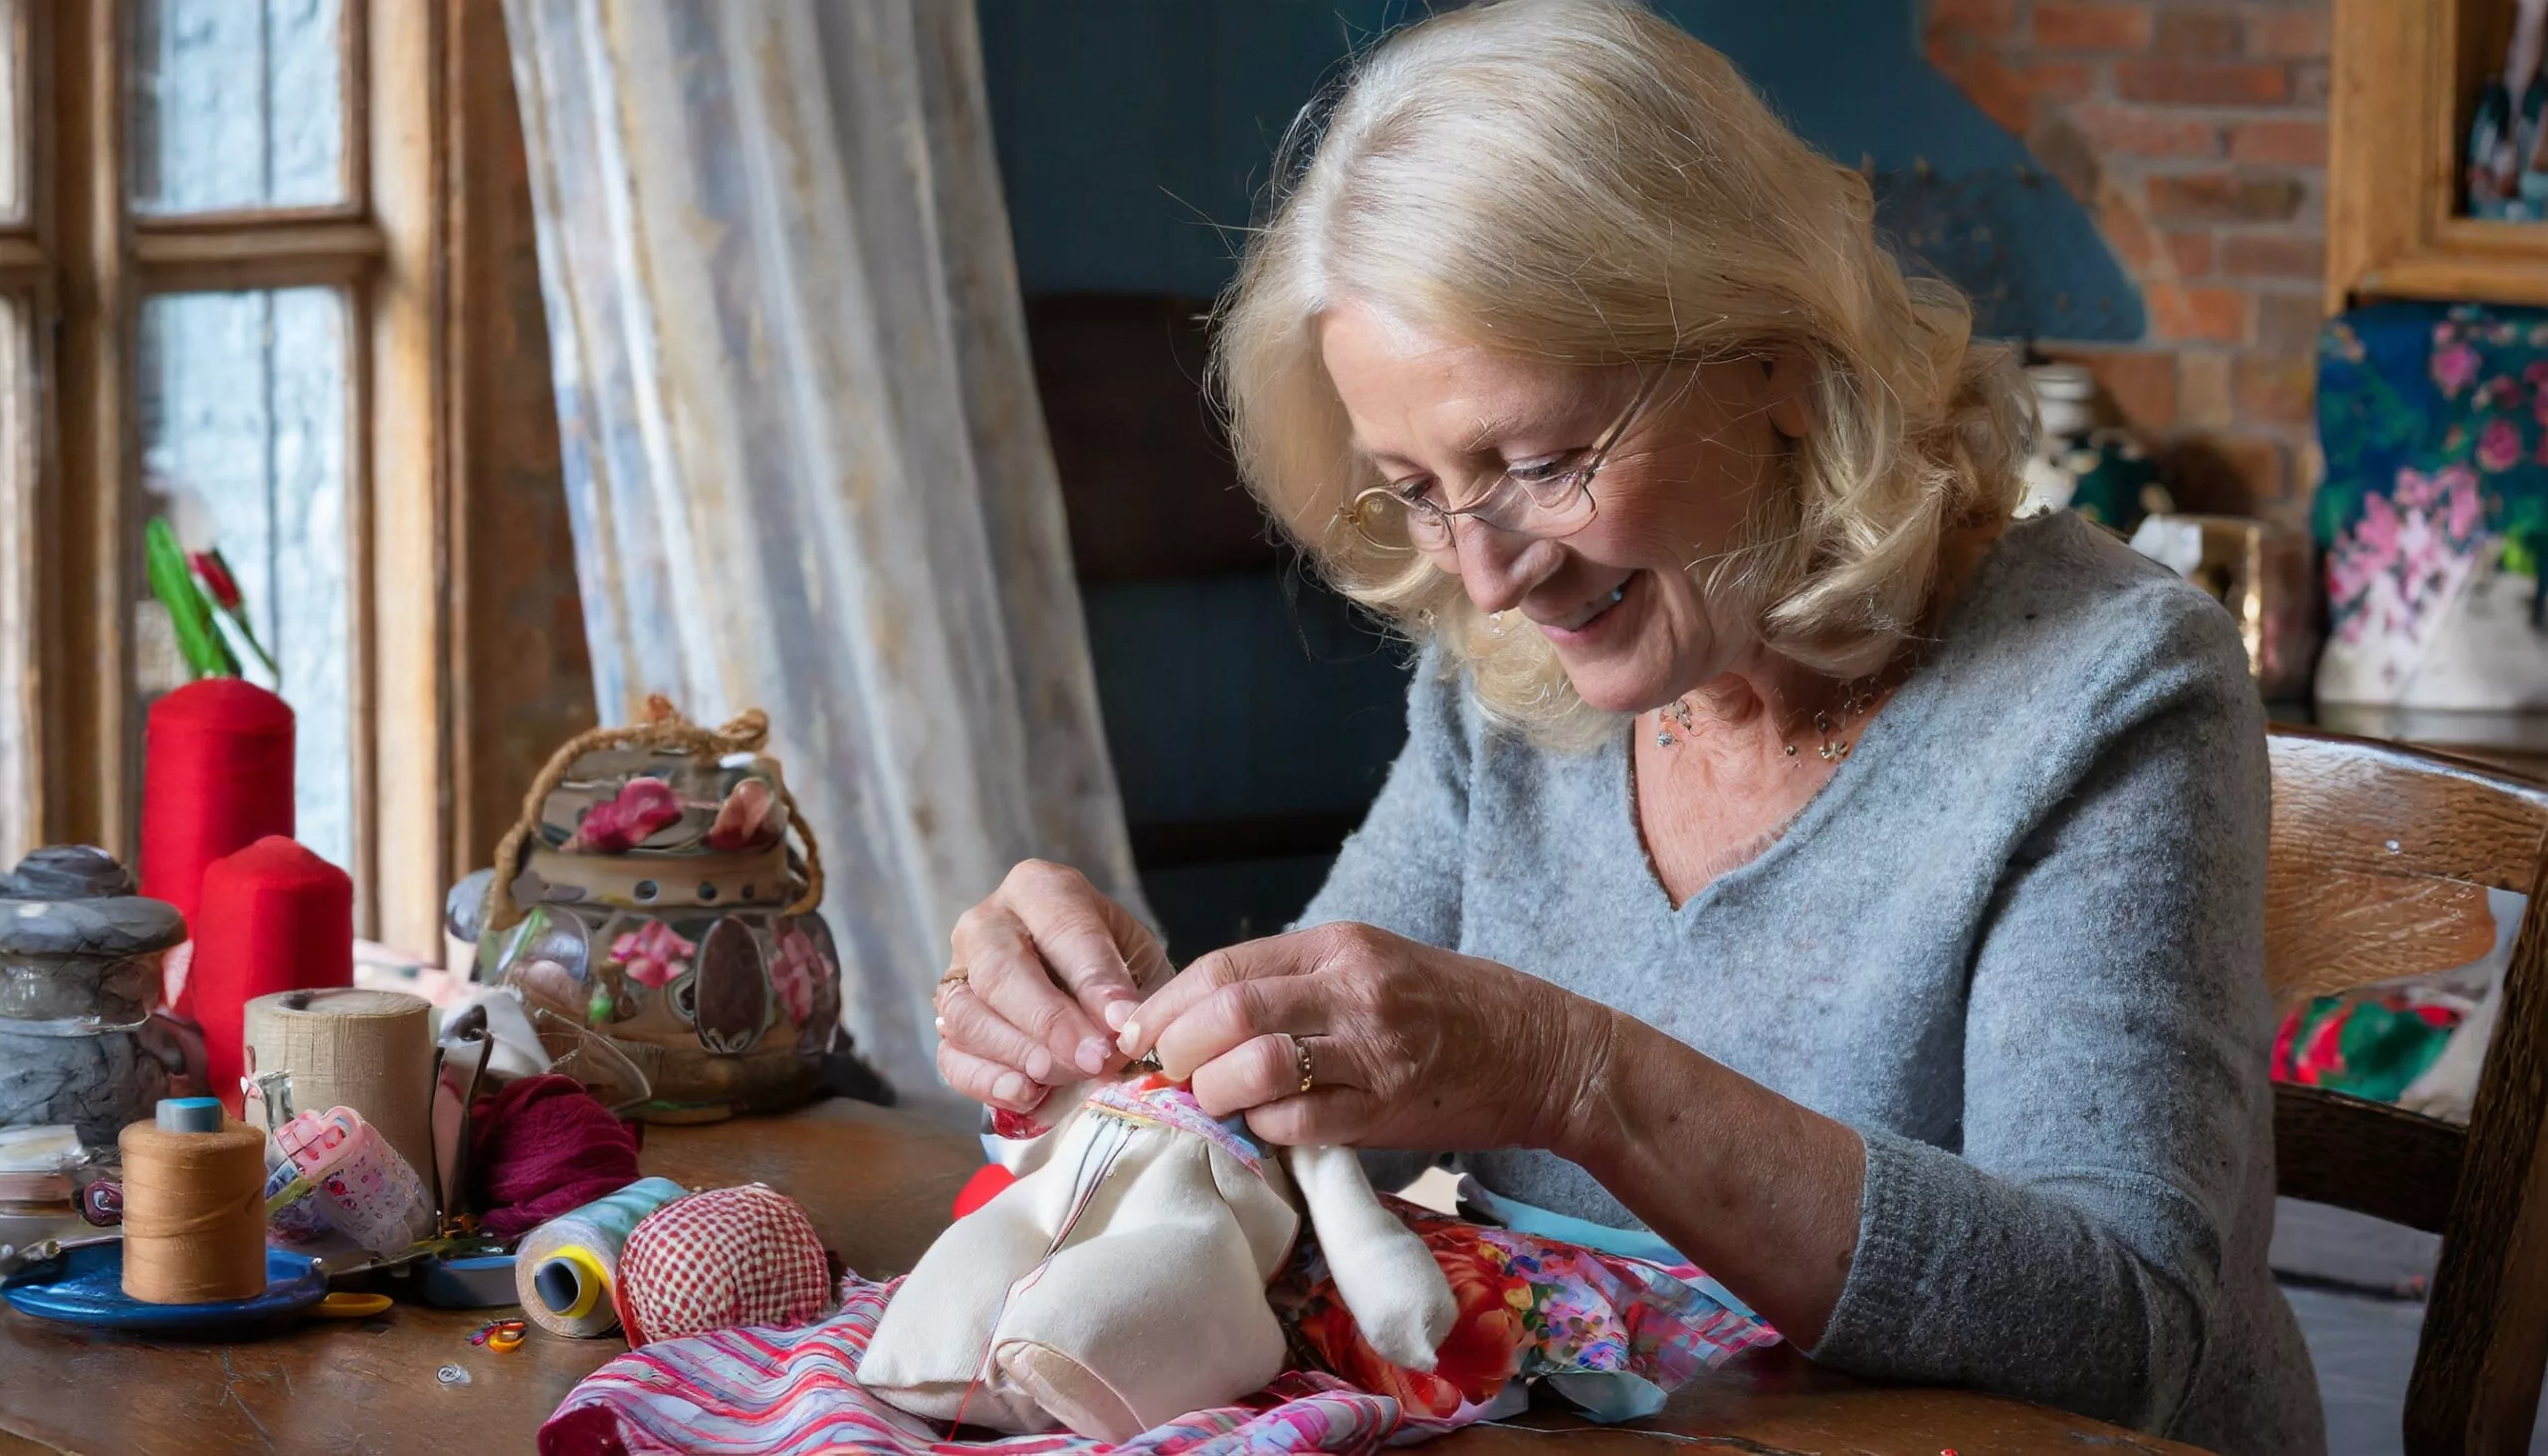 Firefly an older person sewing a doll 97250